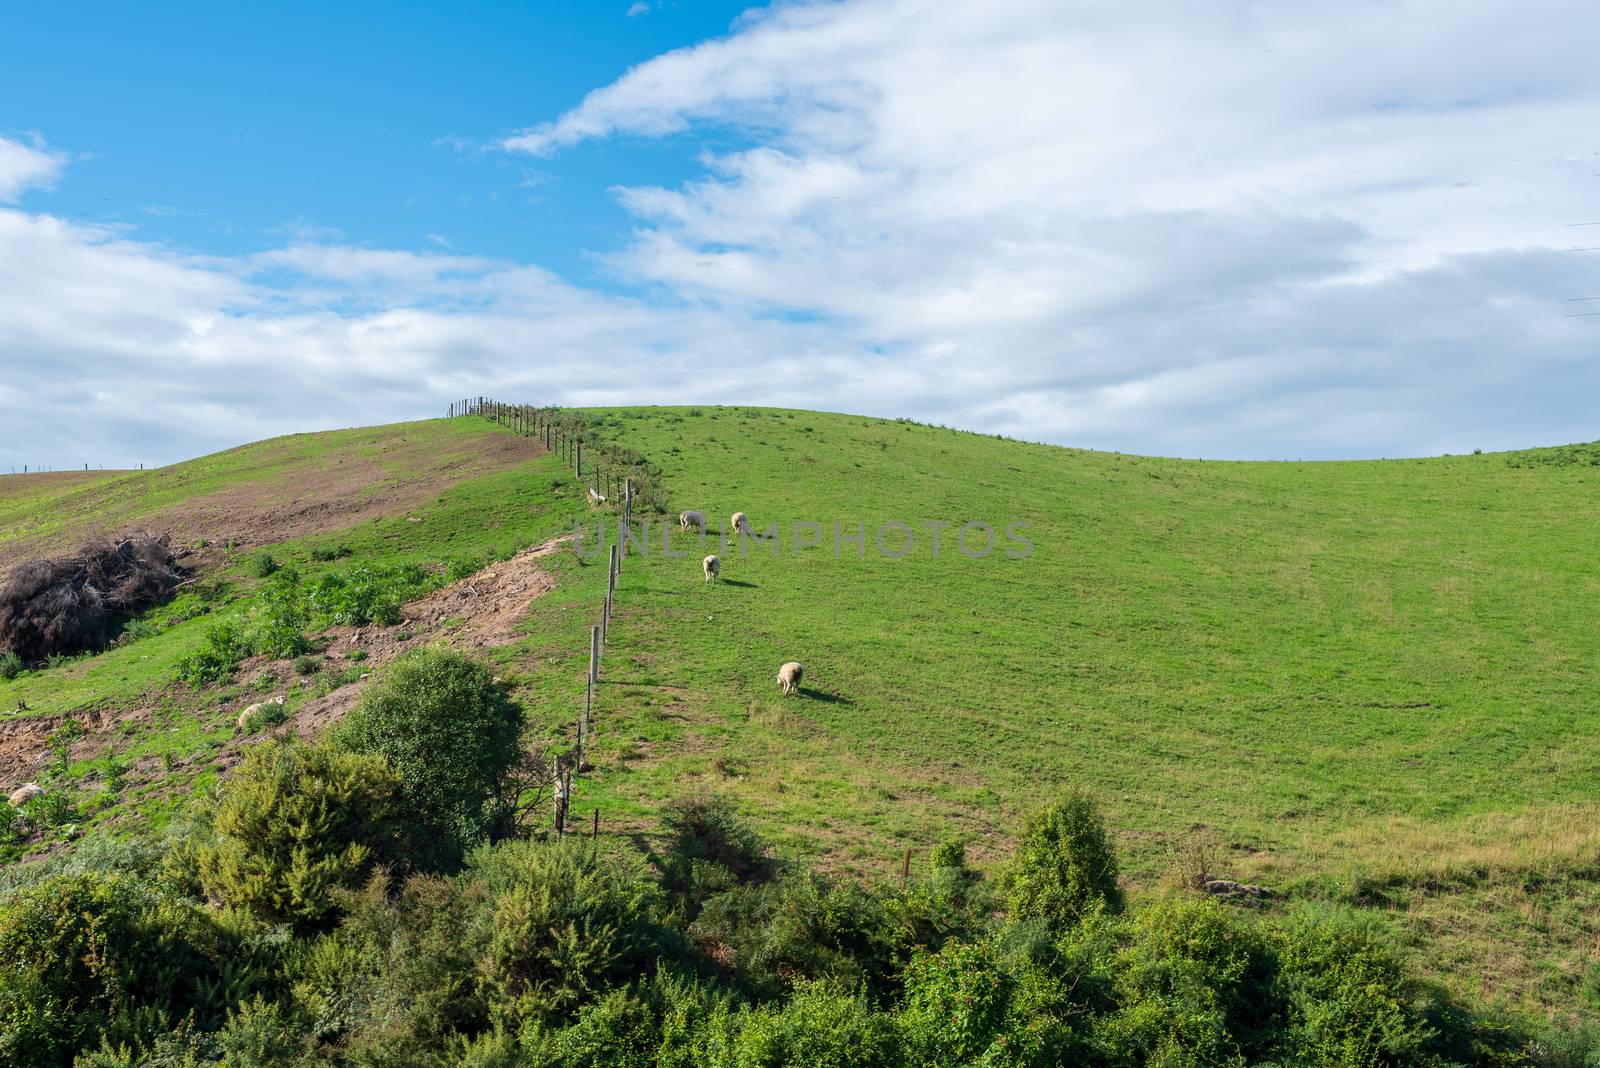 Sheep are grazing on a bright green hill with a blue sky background.